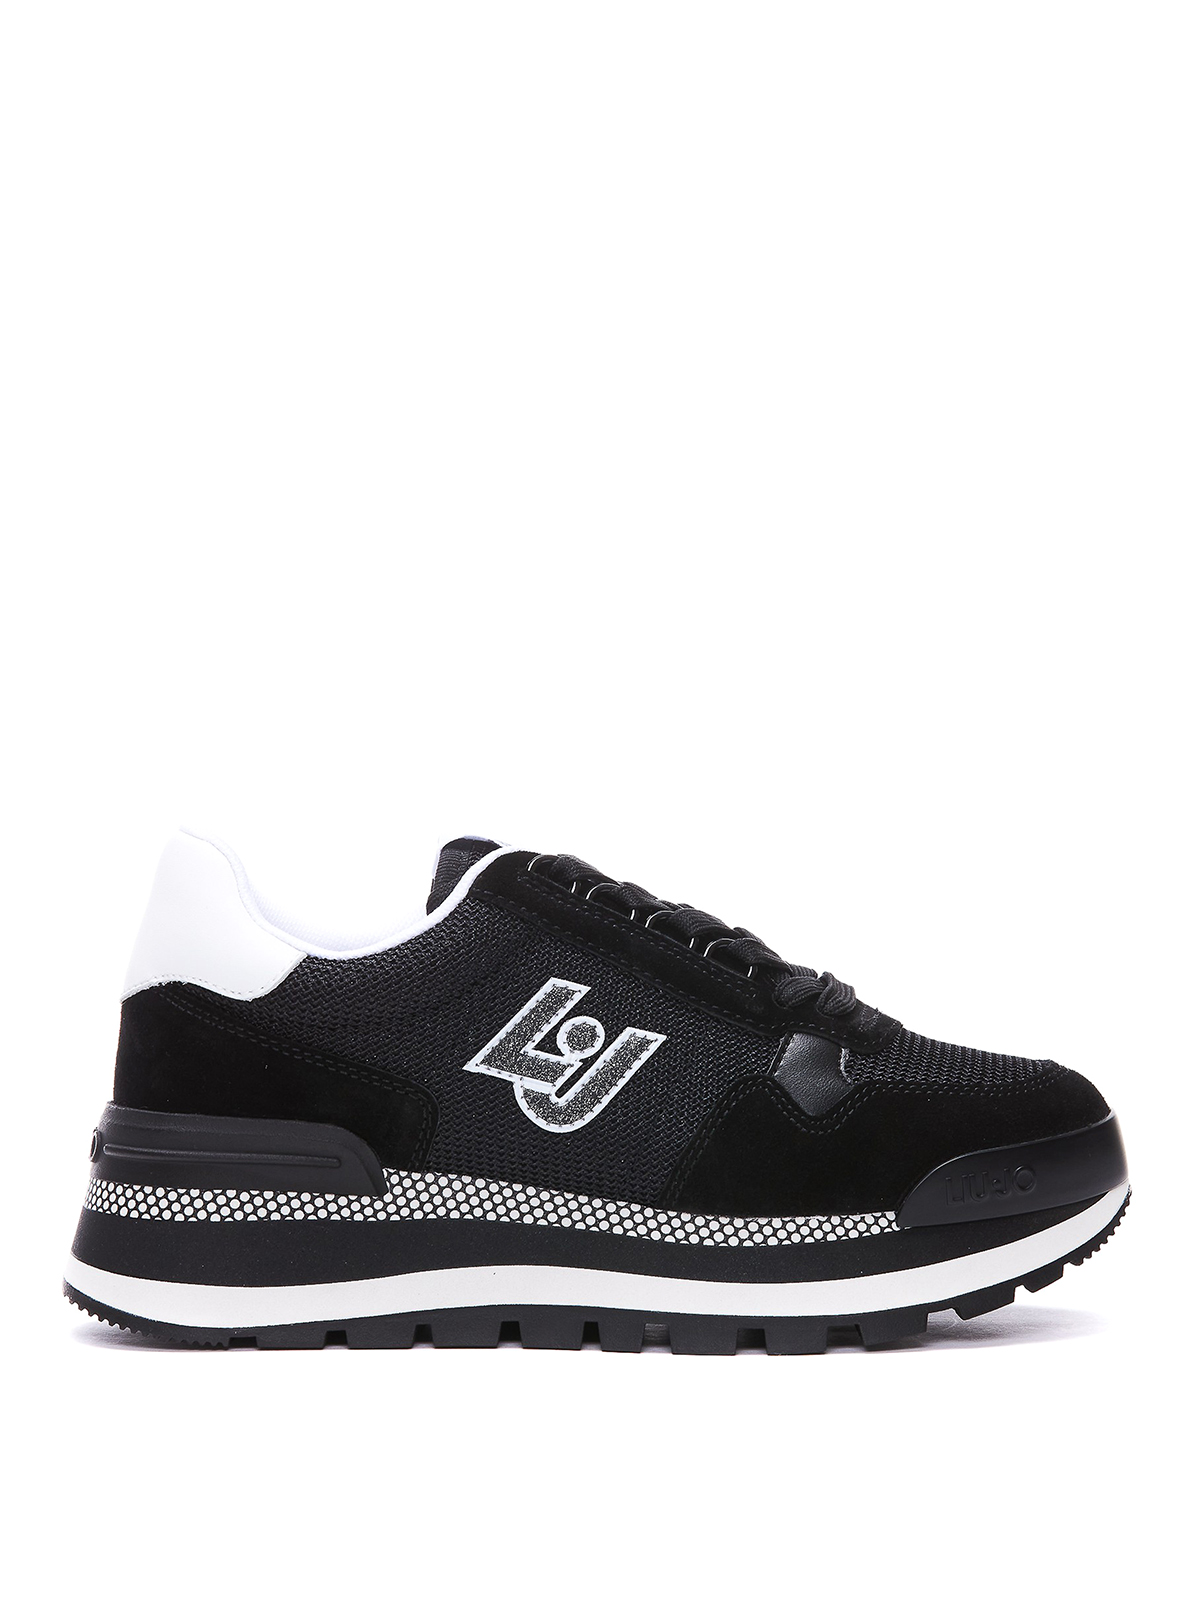 Liu •jo Leather And Fabric Trainers In Black